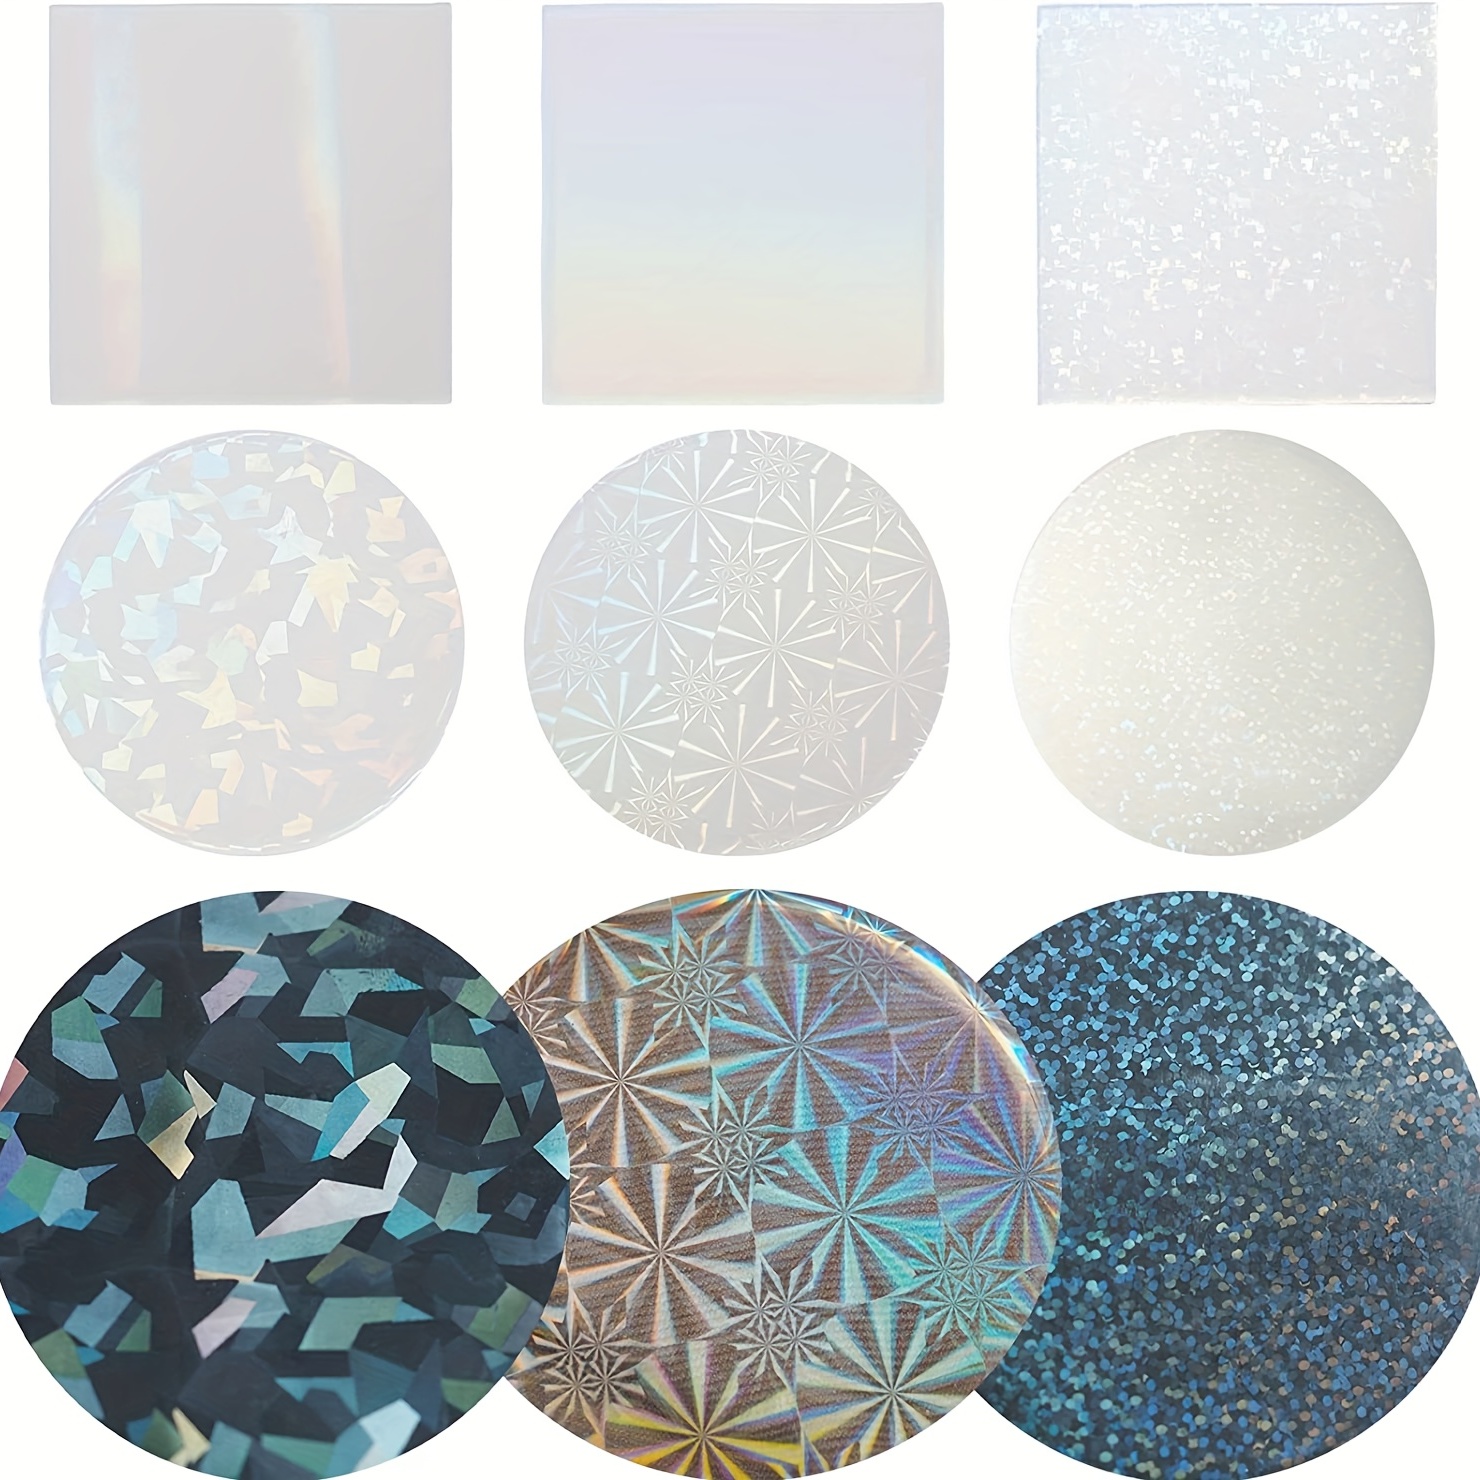 6pcs Holographic Inlay Resin Mold, 6 Patterns of epoxy Resin Casting with  Holographic Silicone Sheet Inserts for Adding Laser Holographic Artwork in